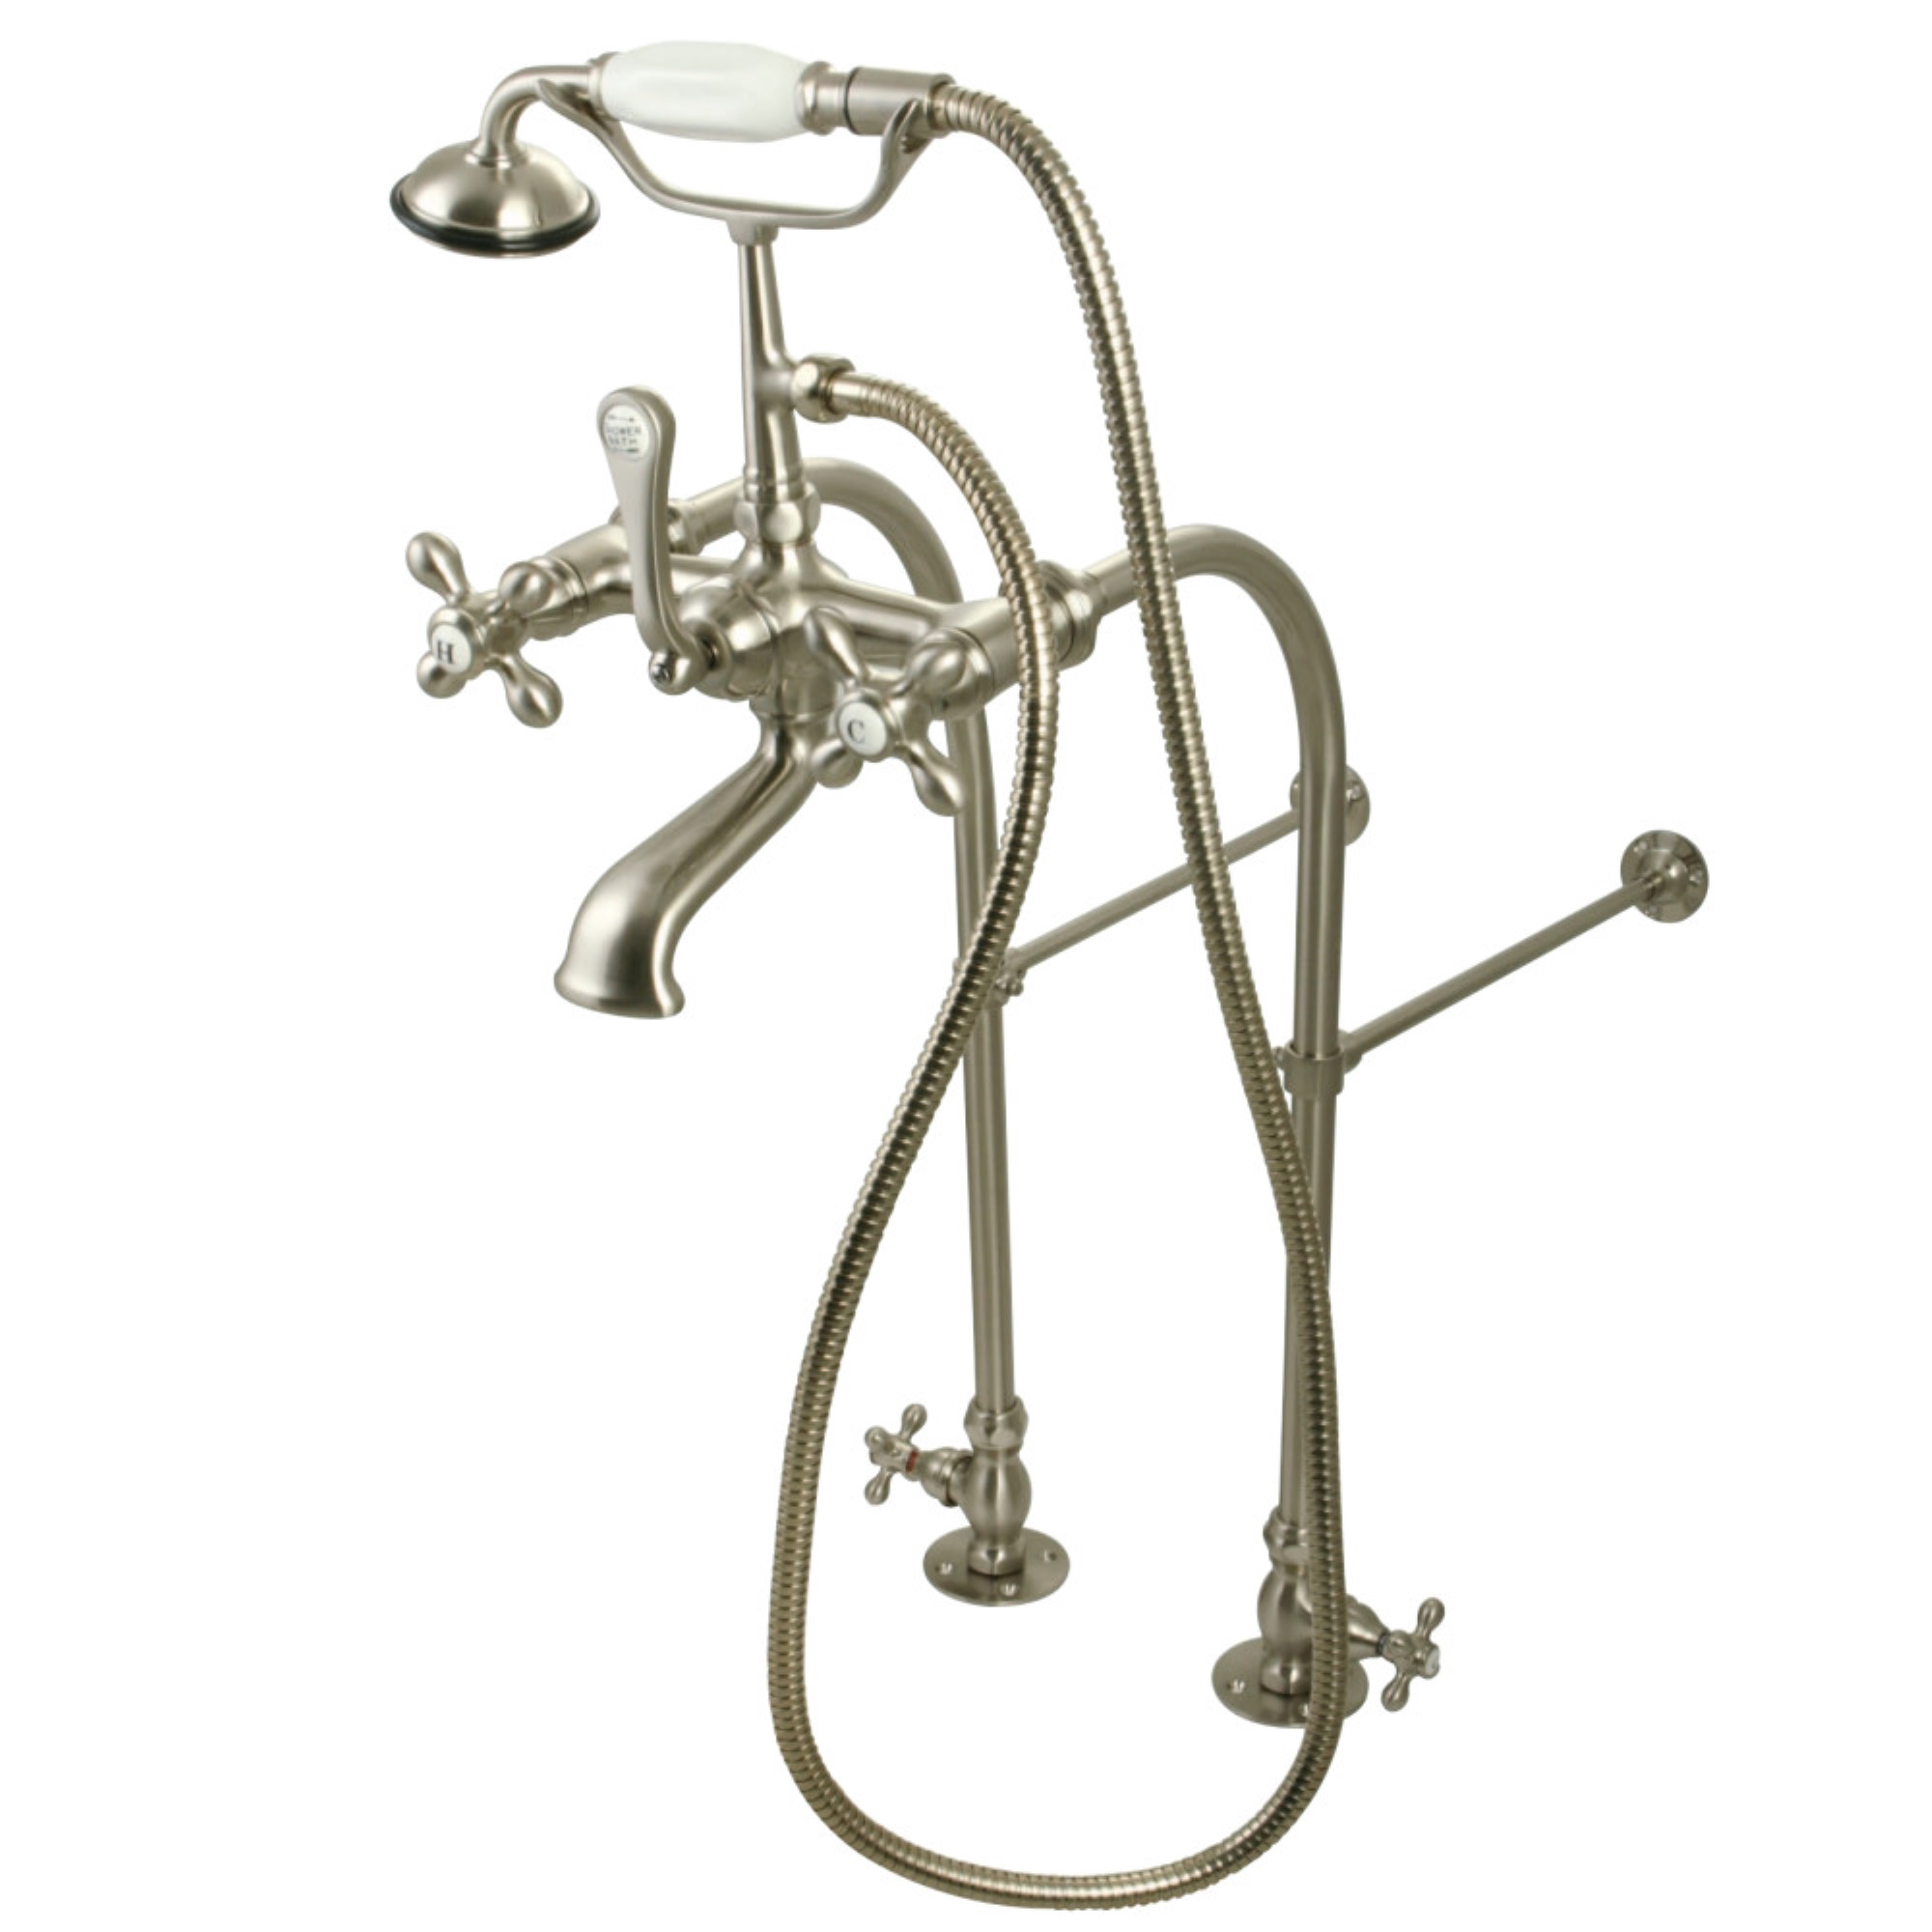 Kingston Brass CC57T458MX Vintage Freestanding Clawfoot Tub Faucet with Hand Shower, Brushed Nickel